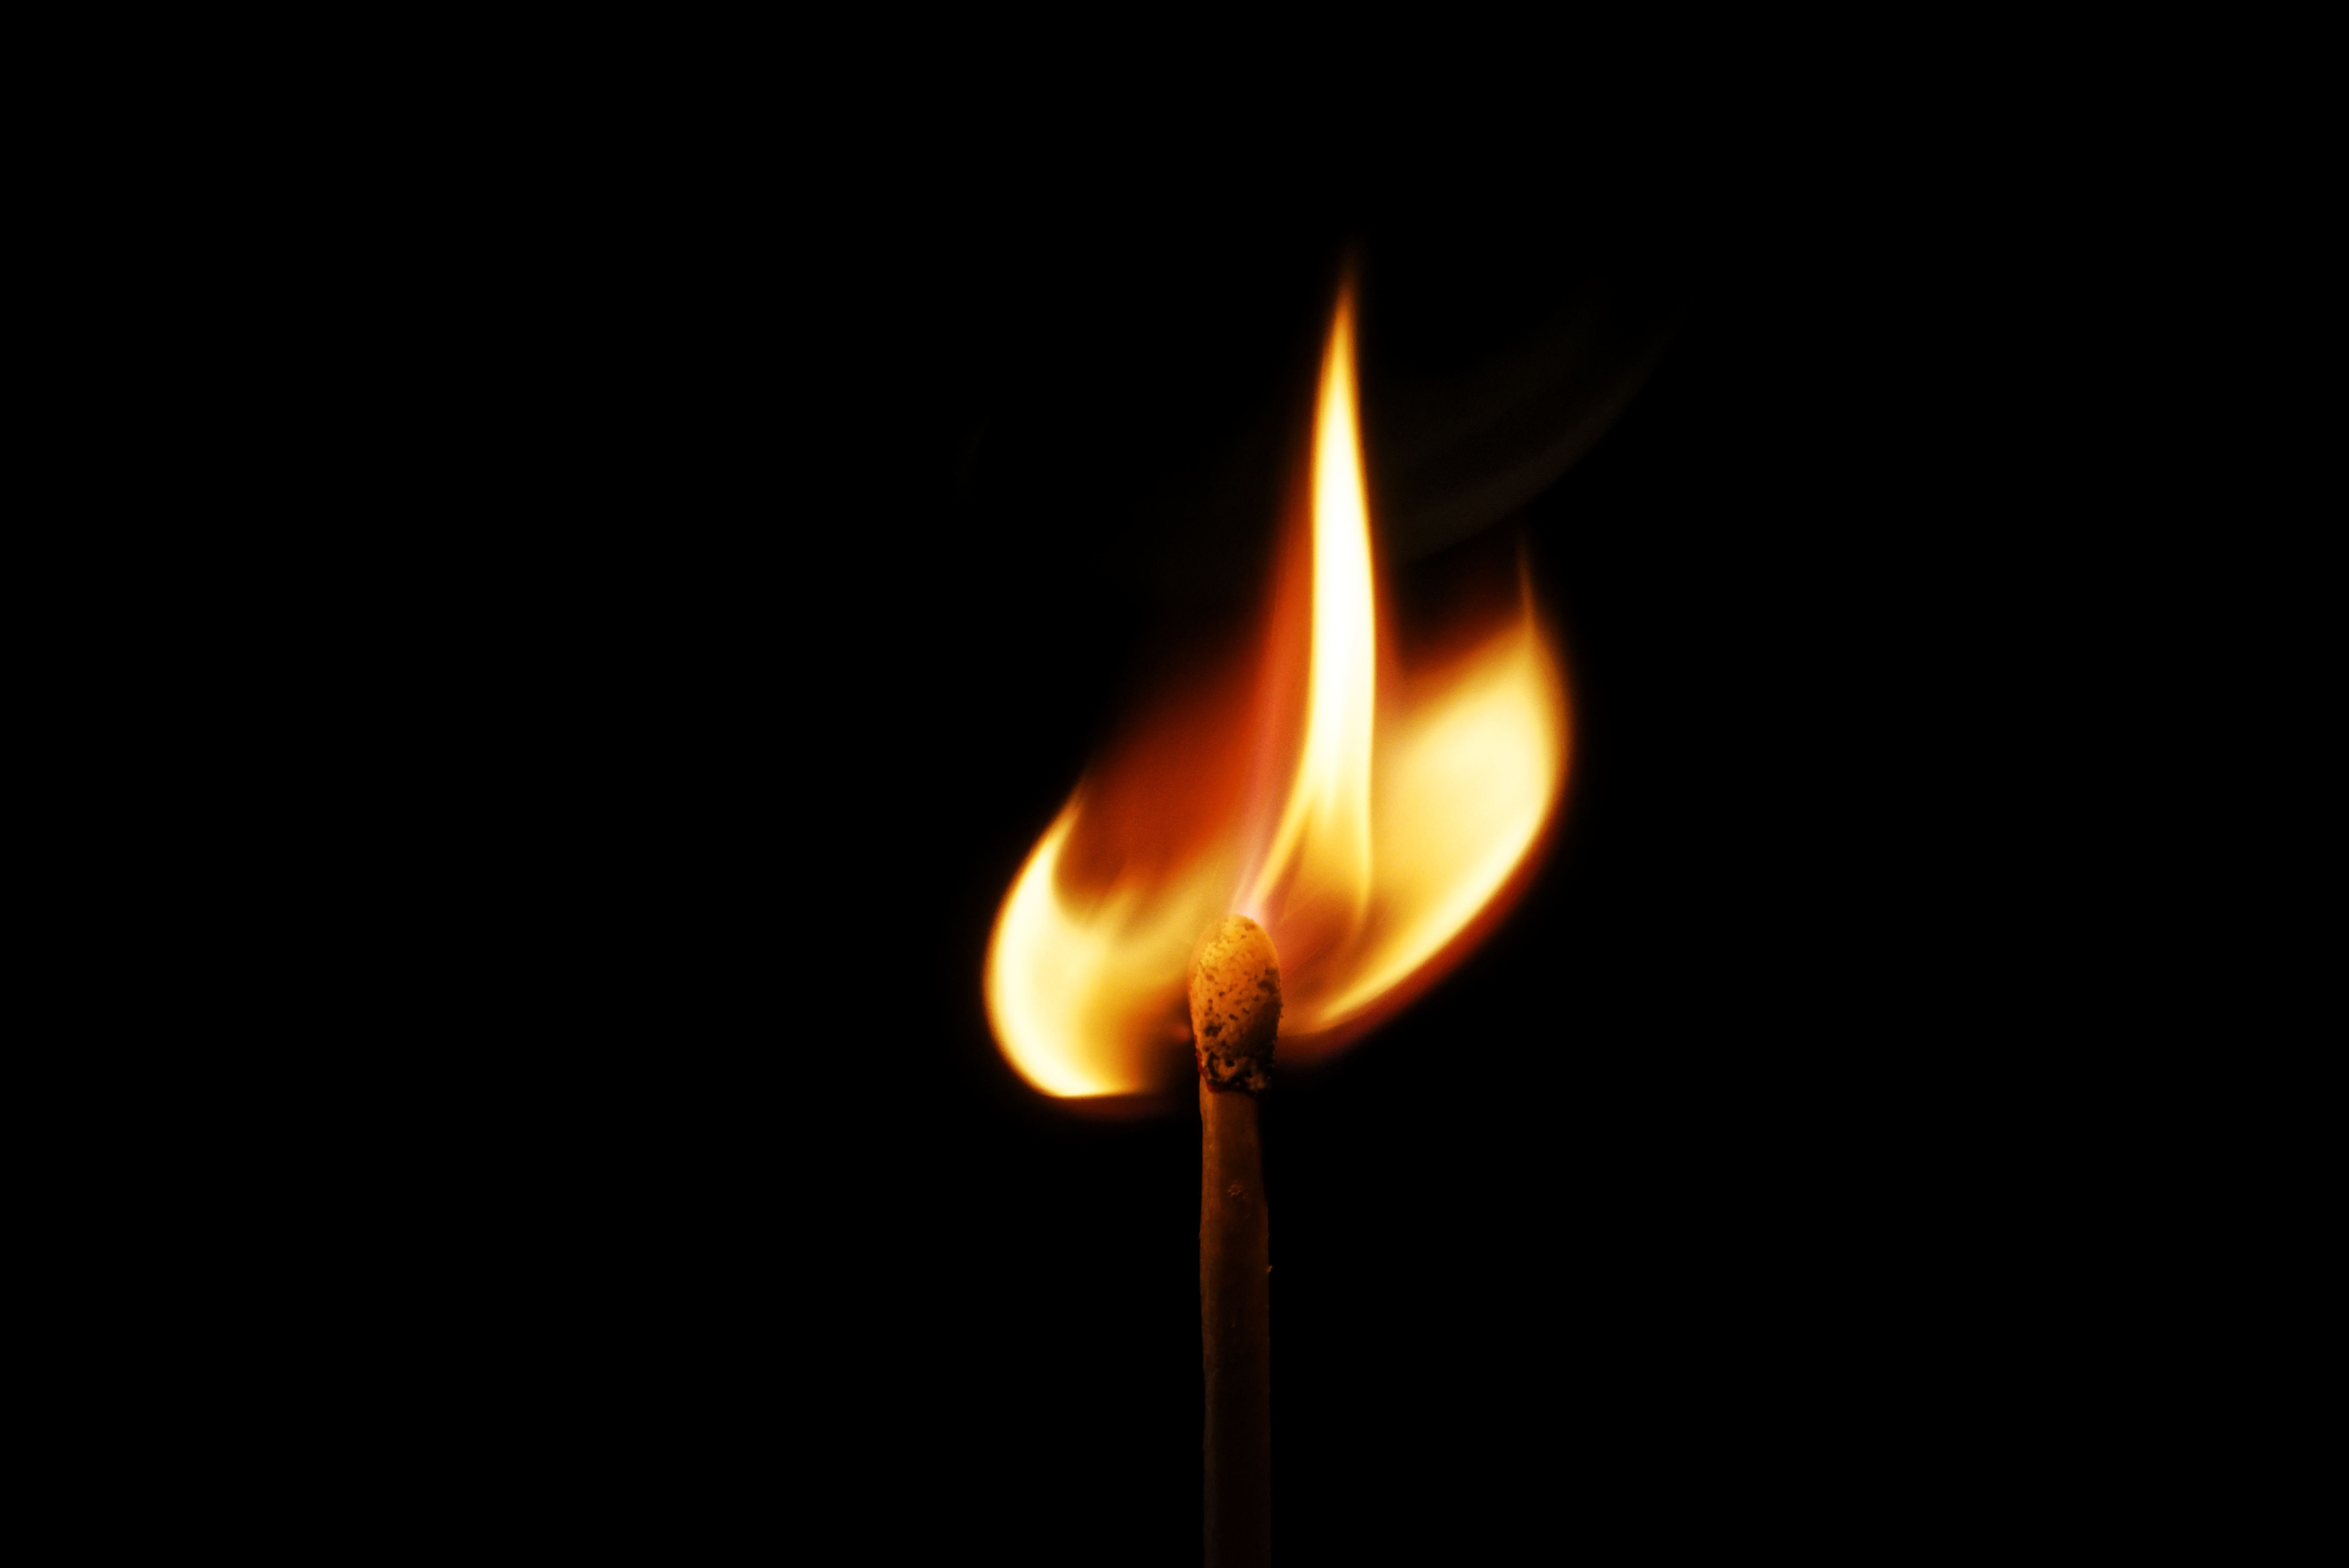 Match flame on black background